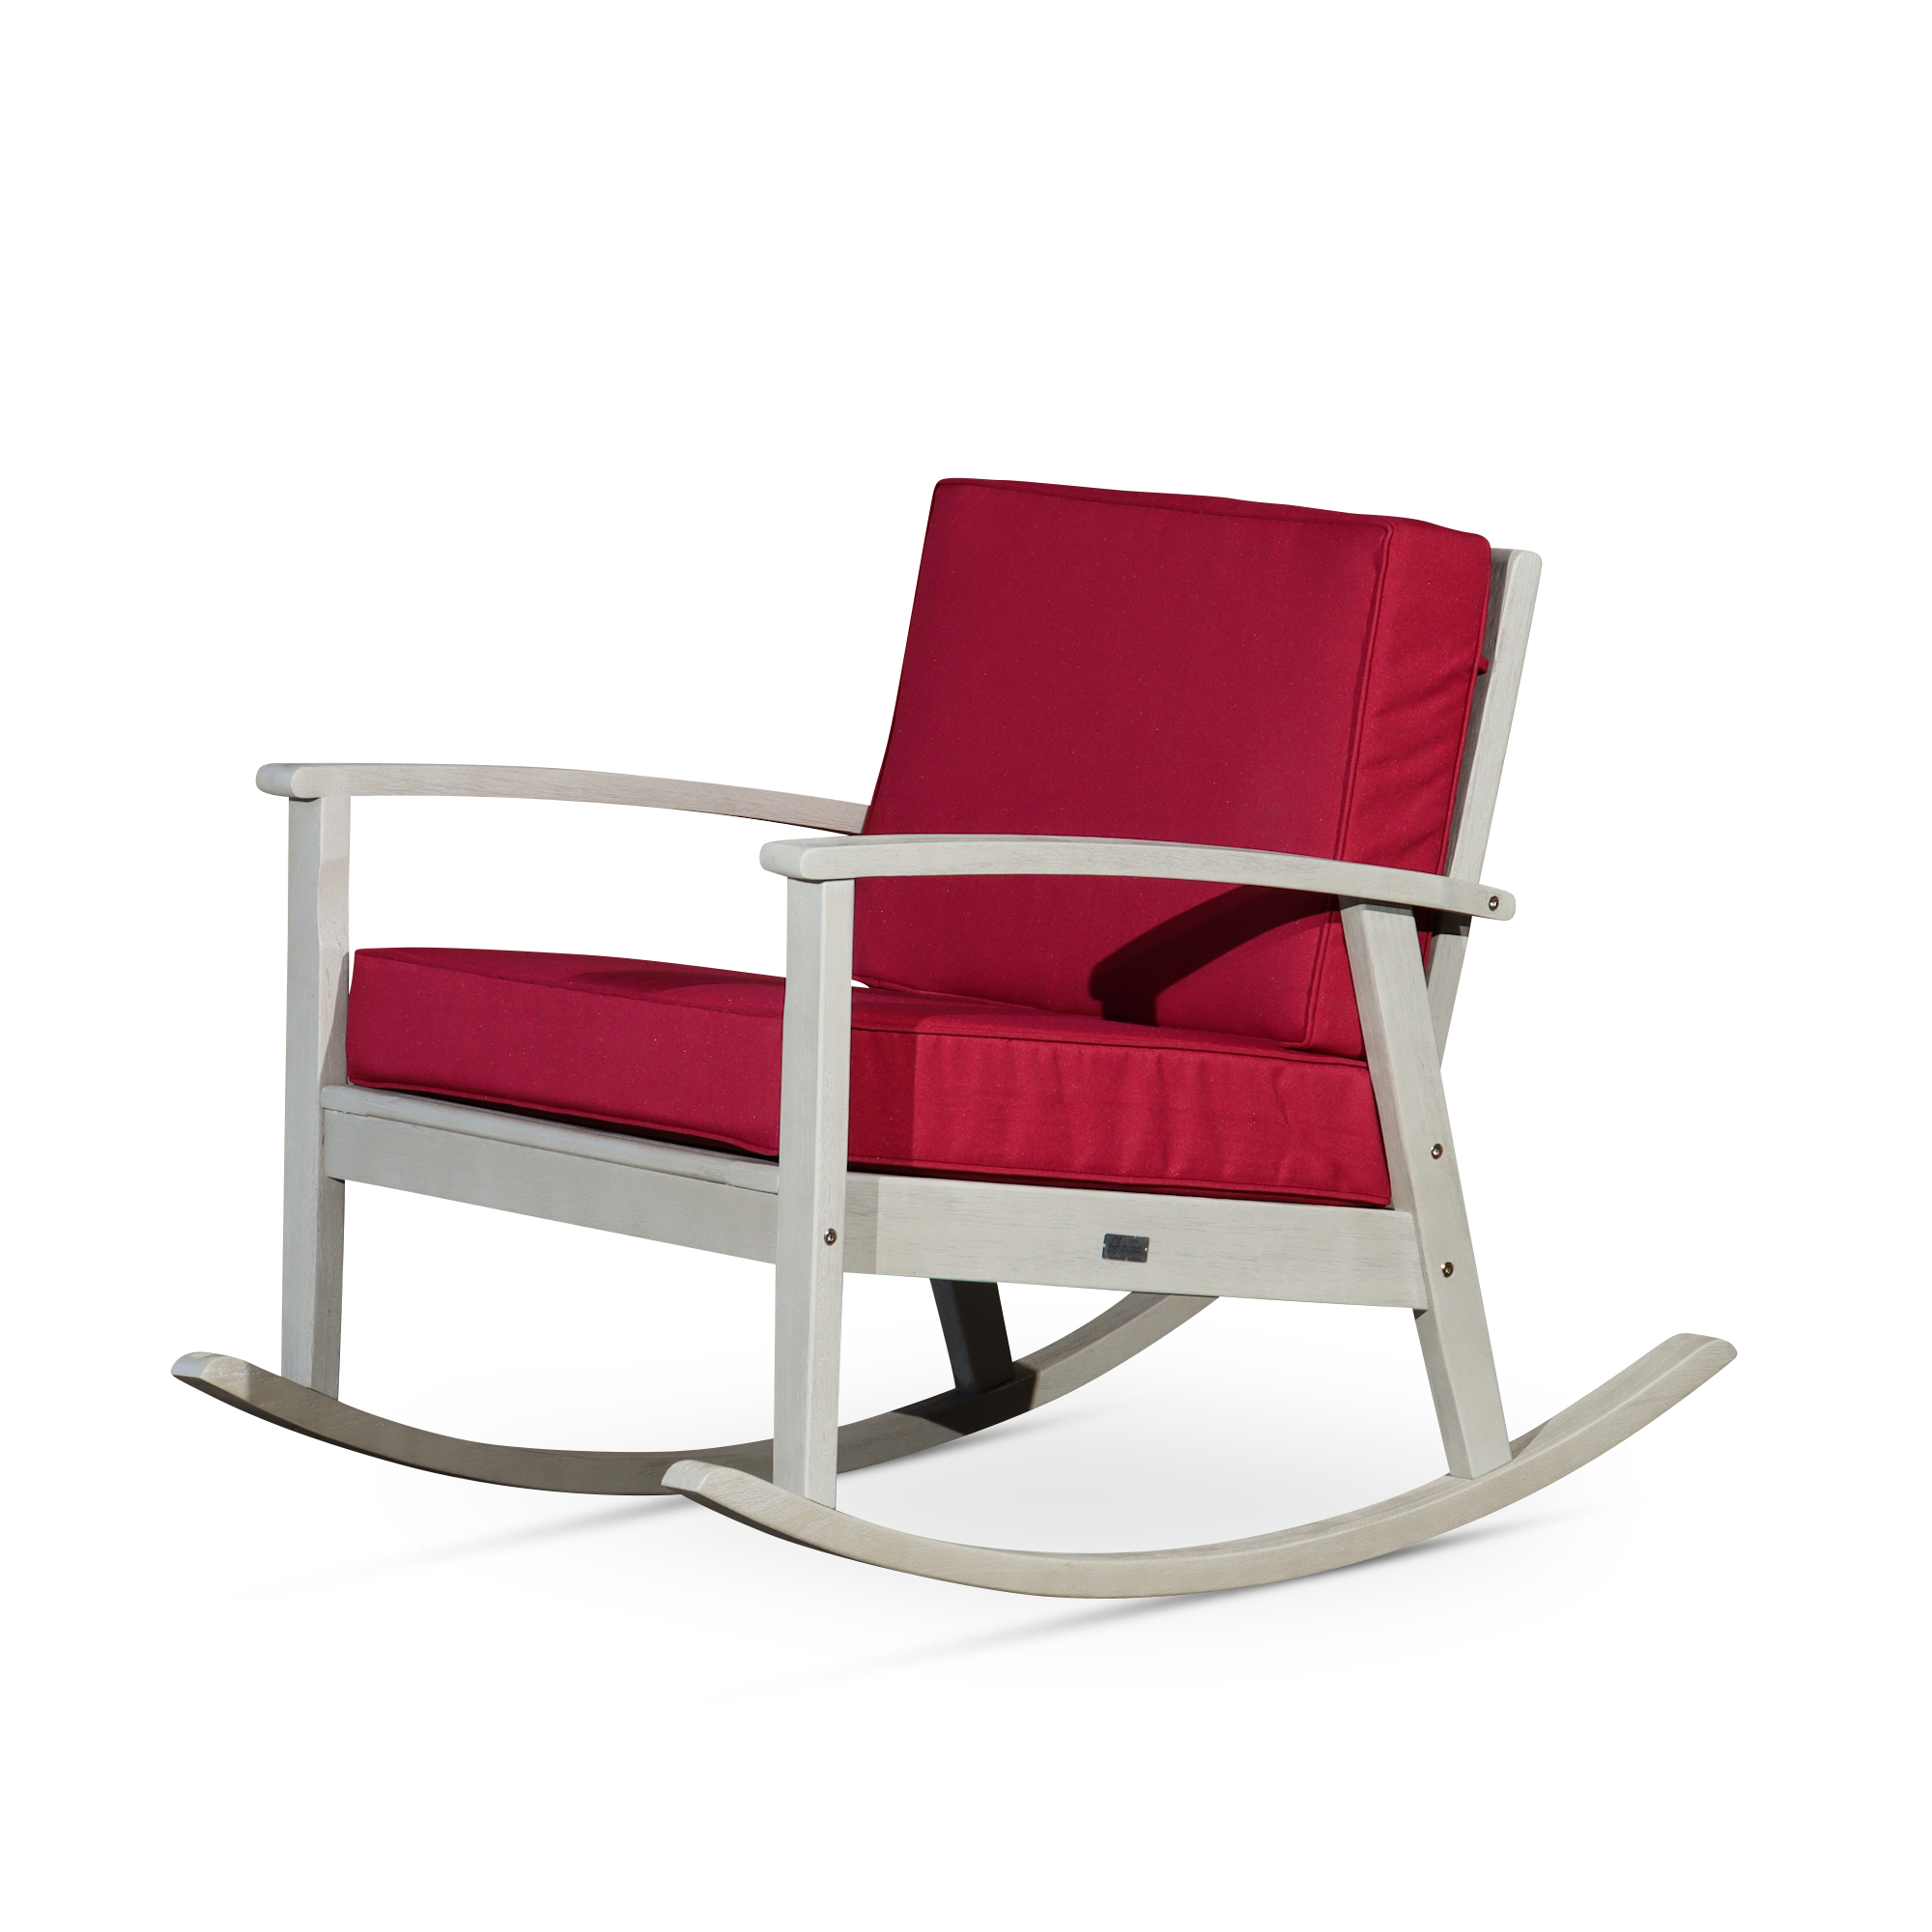 Outdoor-Rocking-Chair-with-Cushions,-Driftwood-Gray-Finish,-Burgundy-Cushions-Outdoor-Chairs